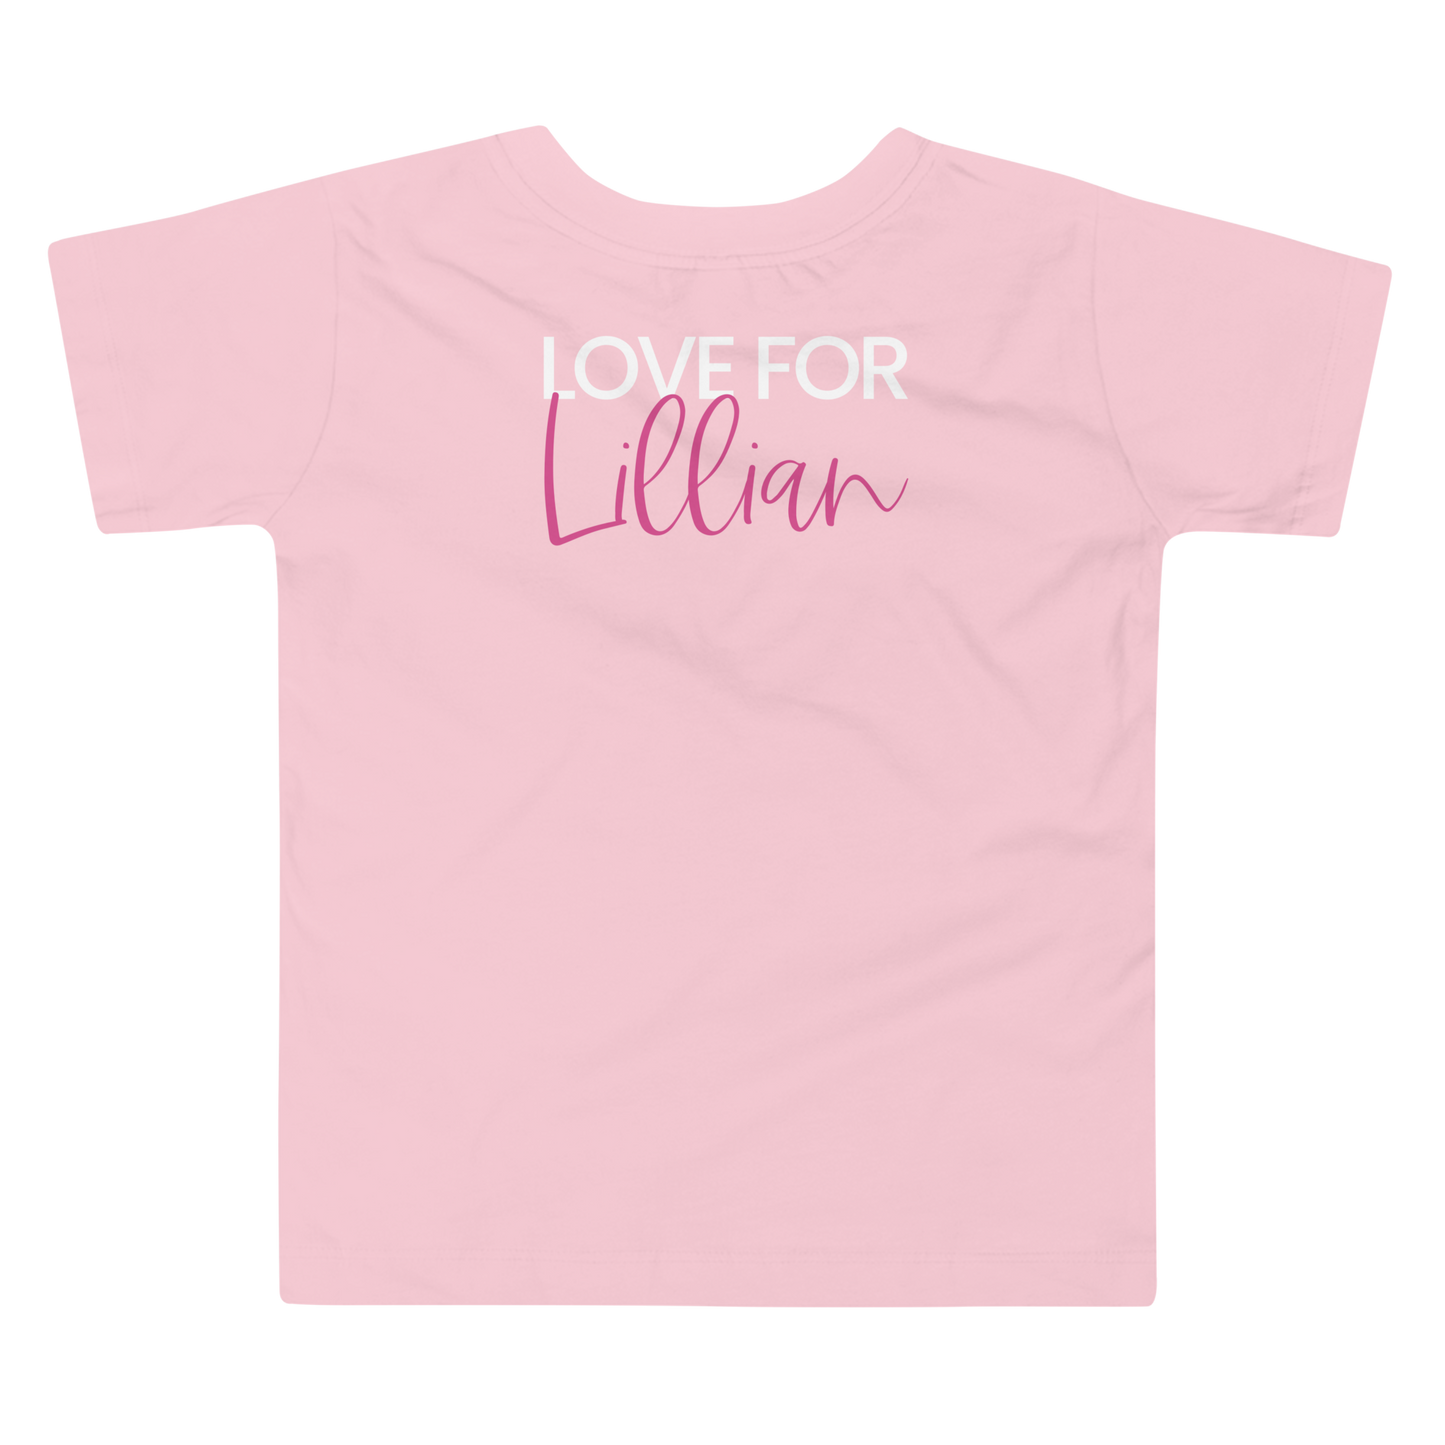 Love for Lils Hand Youth/Toddler Tee